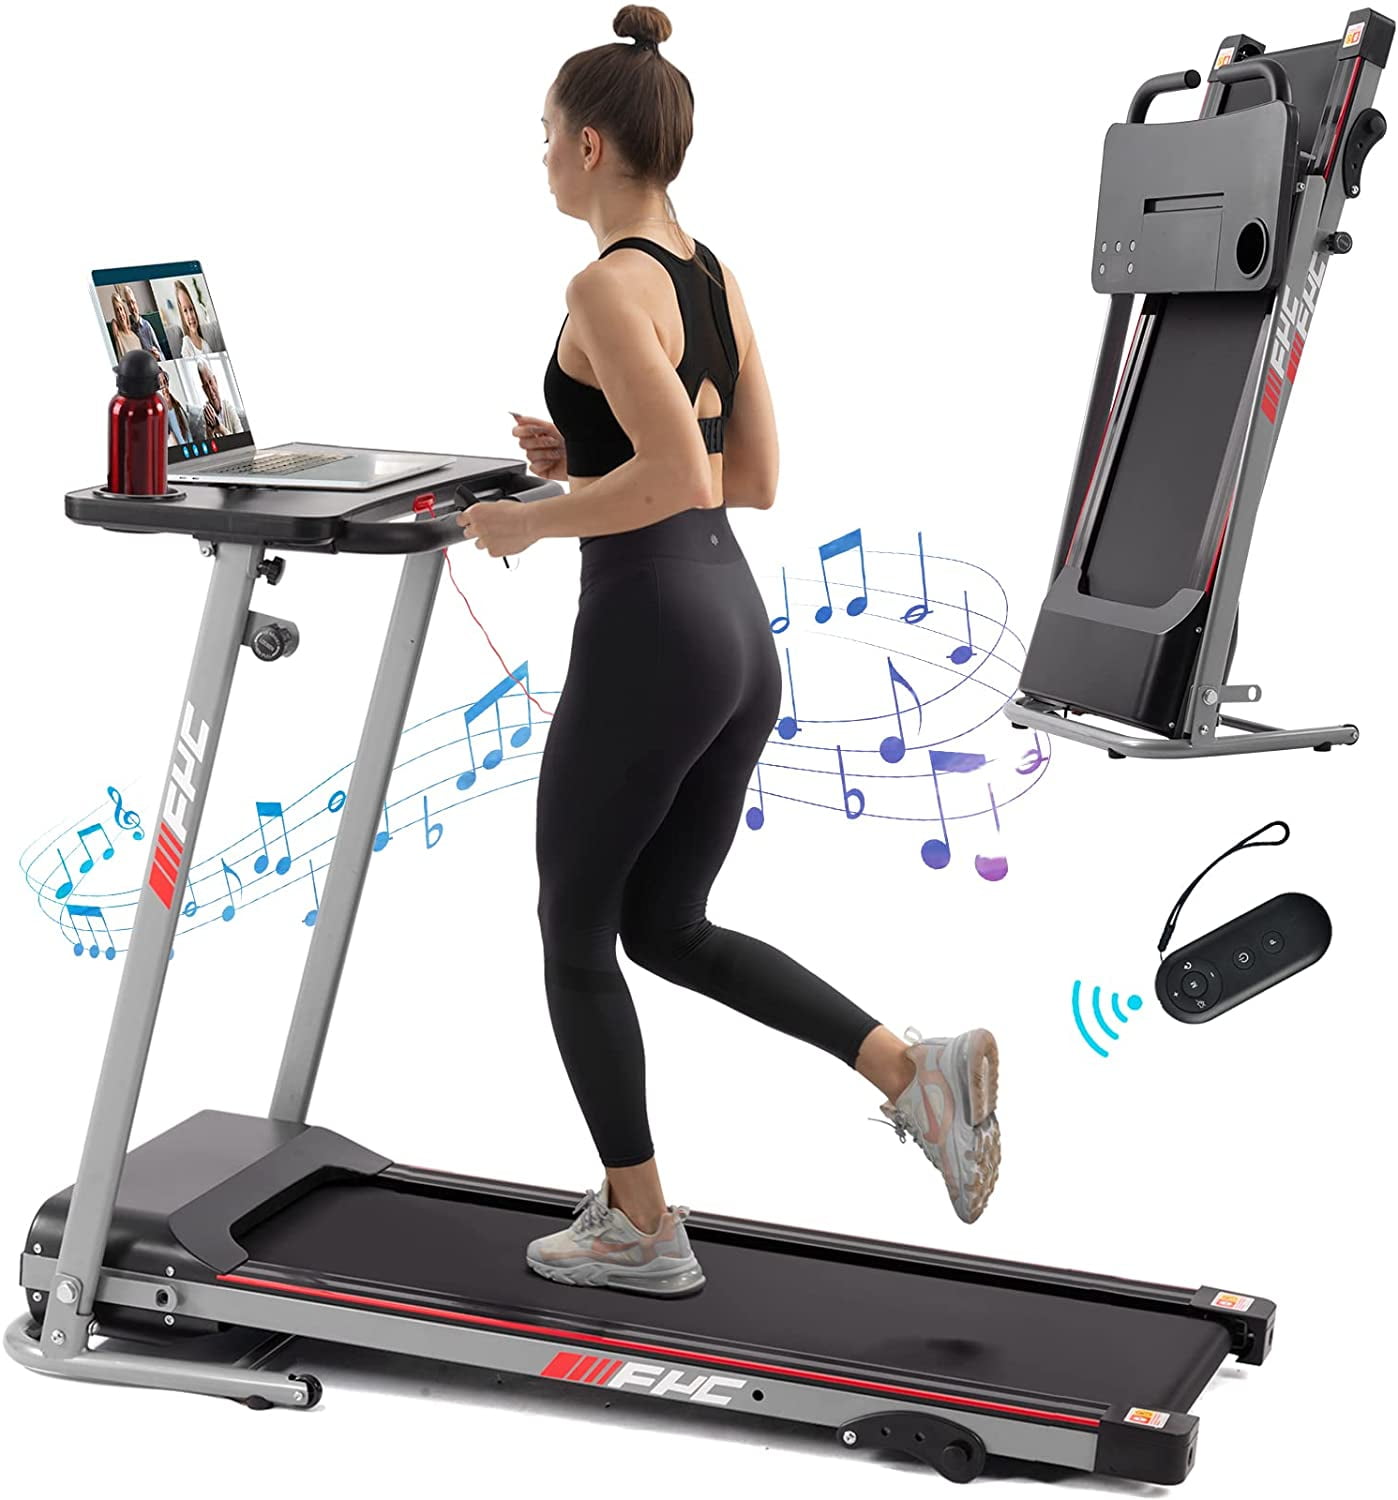 2021 Updated Version 2 HP Folding Incline Exercise Treadmill for Running, Walking and Jogging Exercises with 12 Preset Programs, Tracking Pulse, Calories - Walmart.com